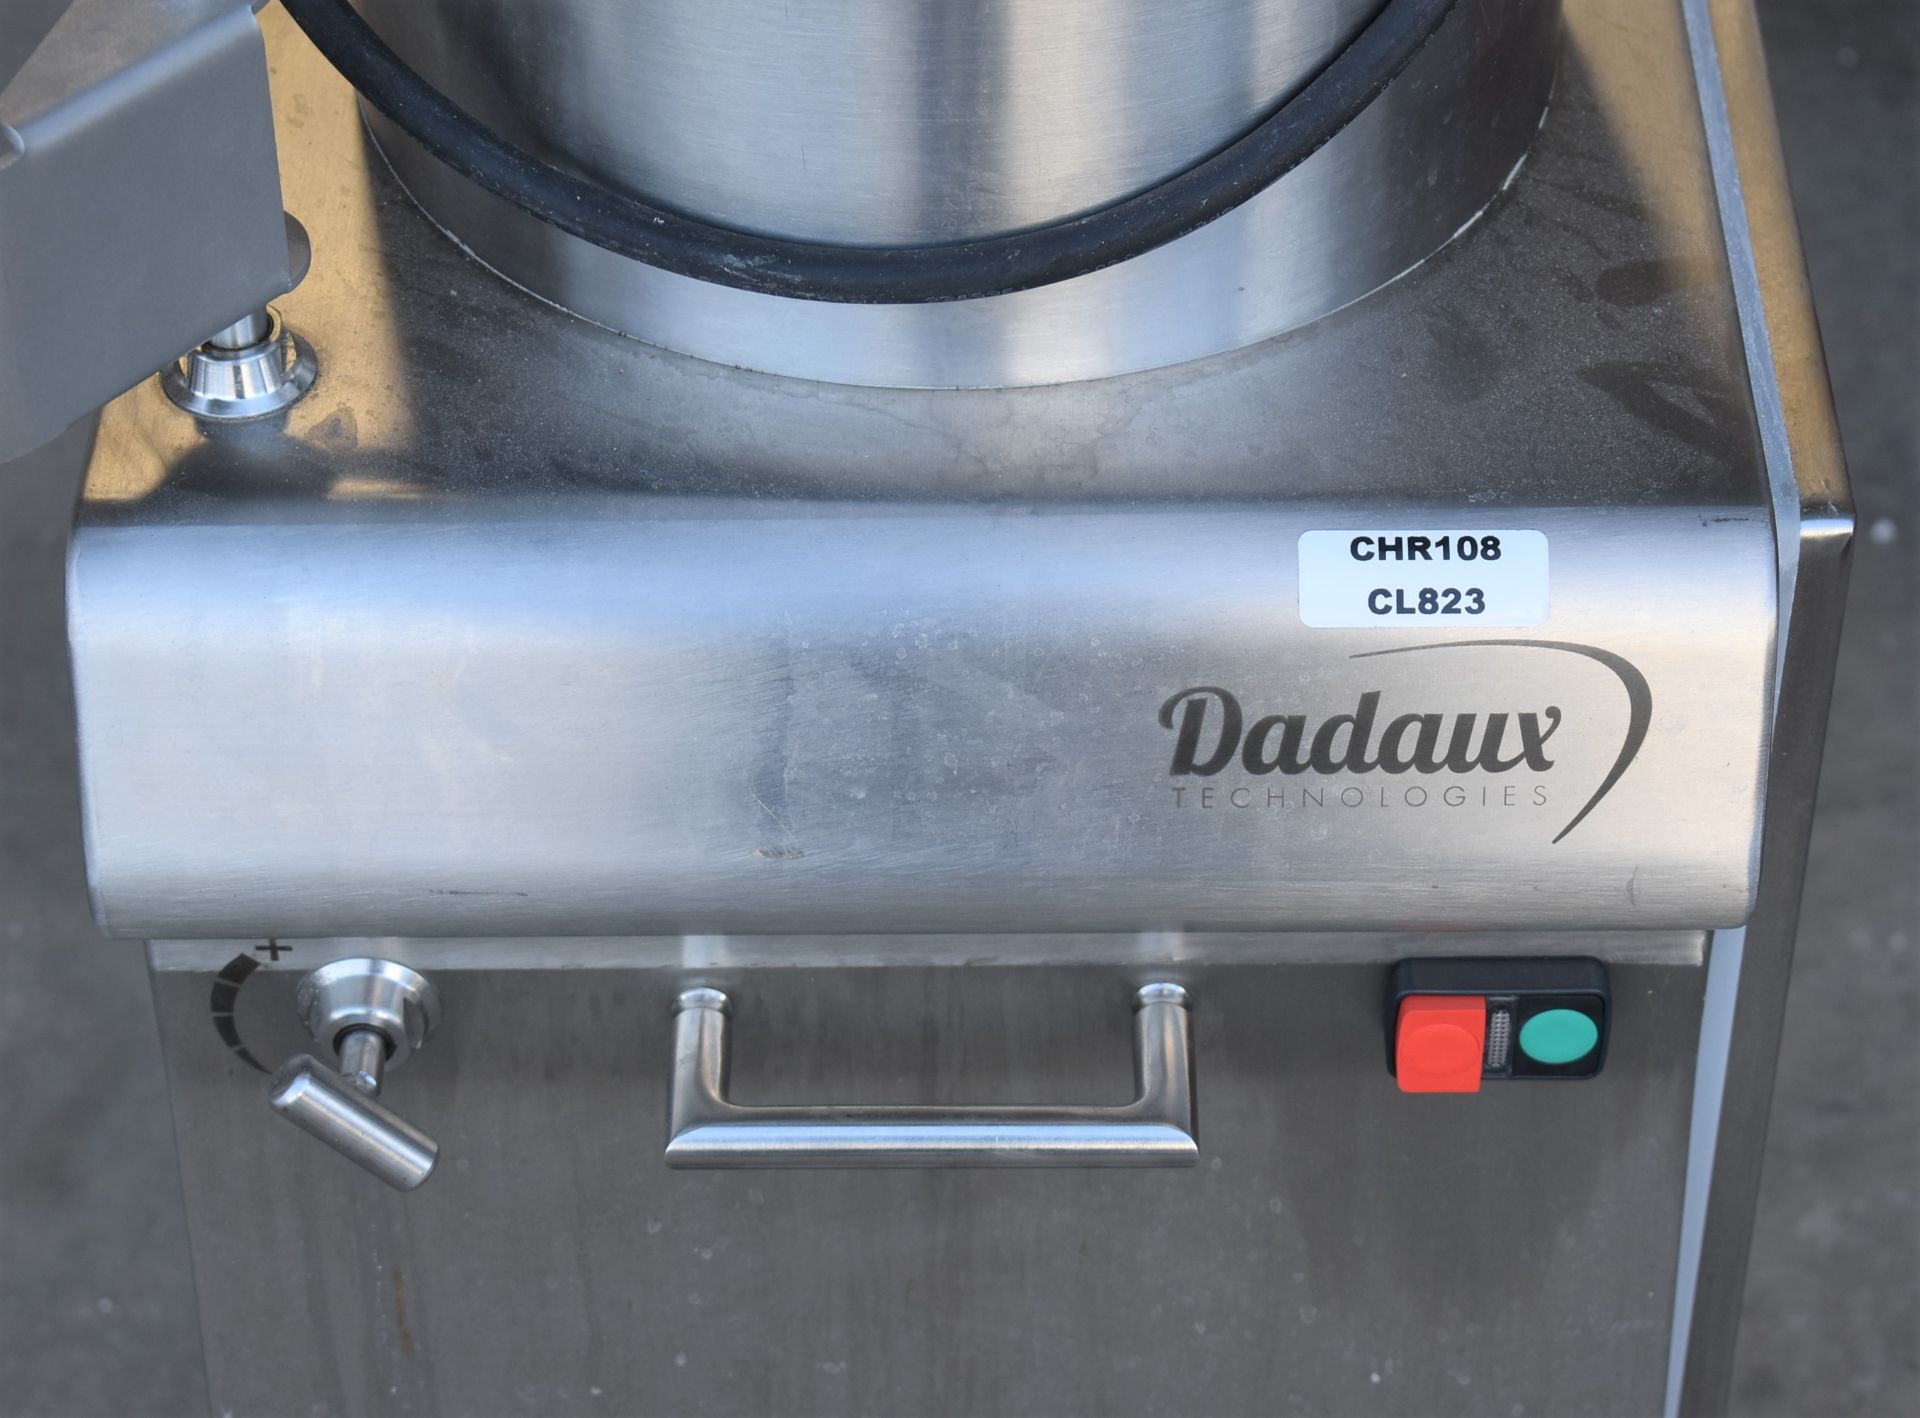 1 x Dadaux PHX25 Hydraulic Sausage Filler / Stuffer - Single Phase - Stainless Steel - RRP £4,900 - Image 4 of 4